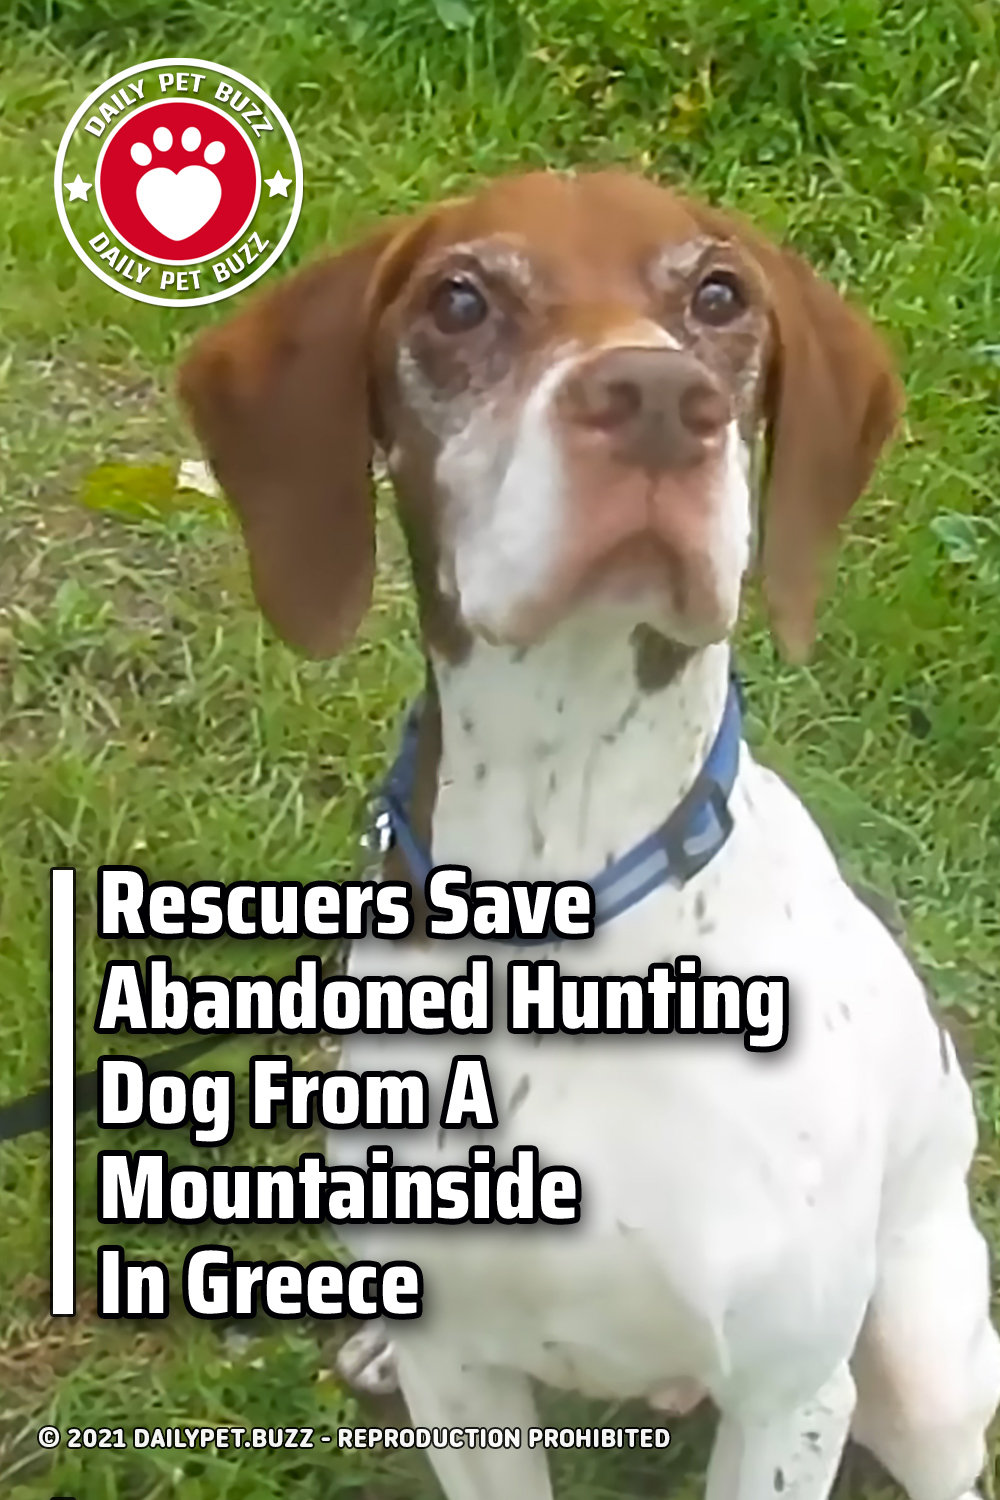 Rescuers Save Abandoned Hunting Dog From A Mountainside In Greece